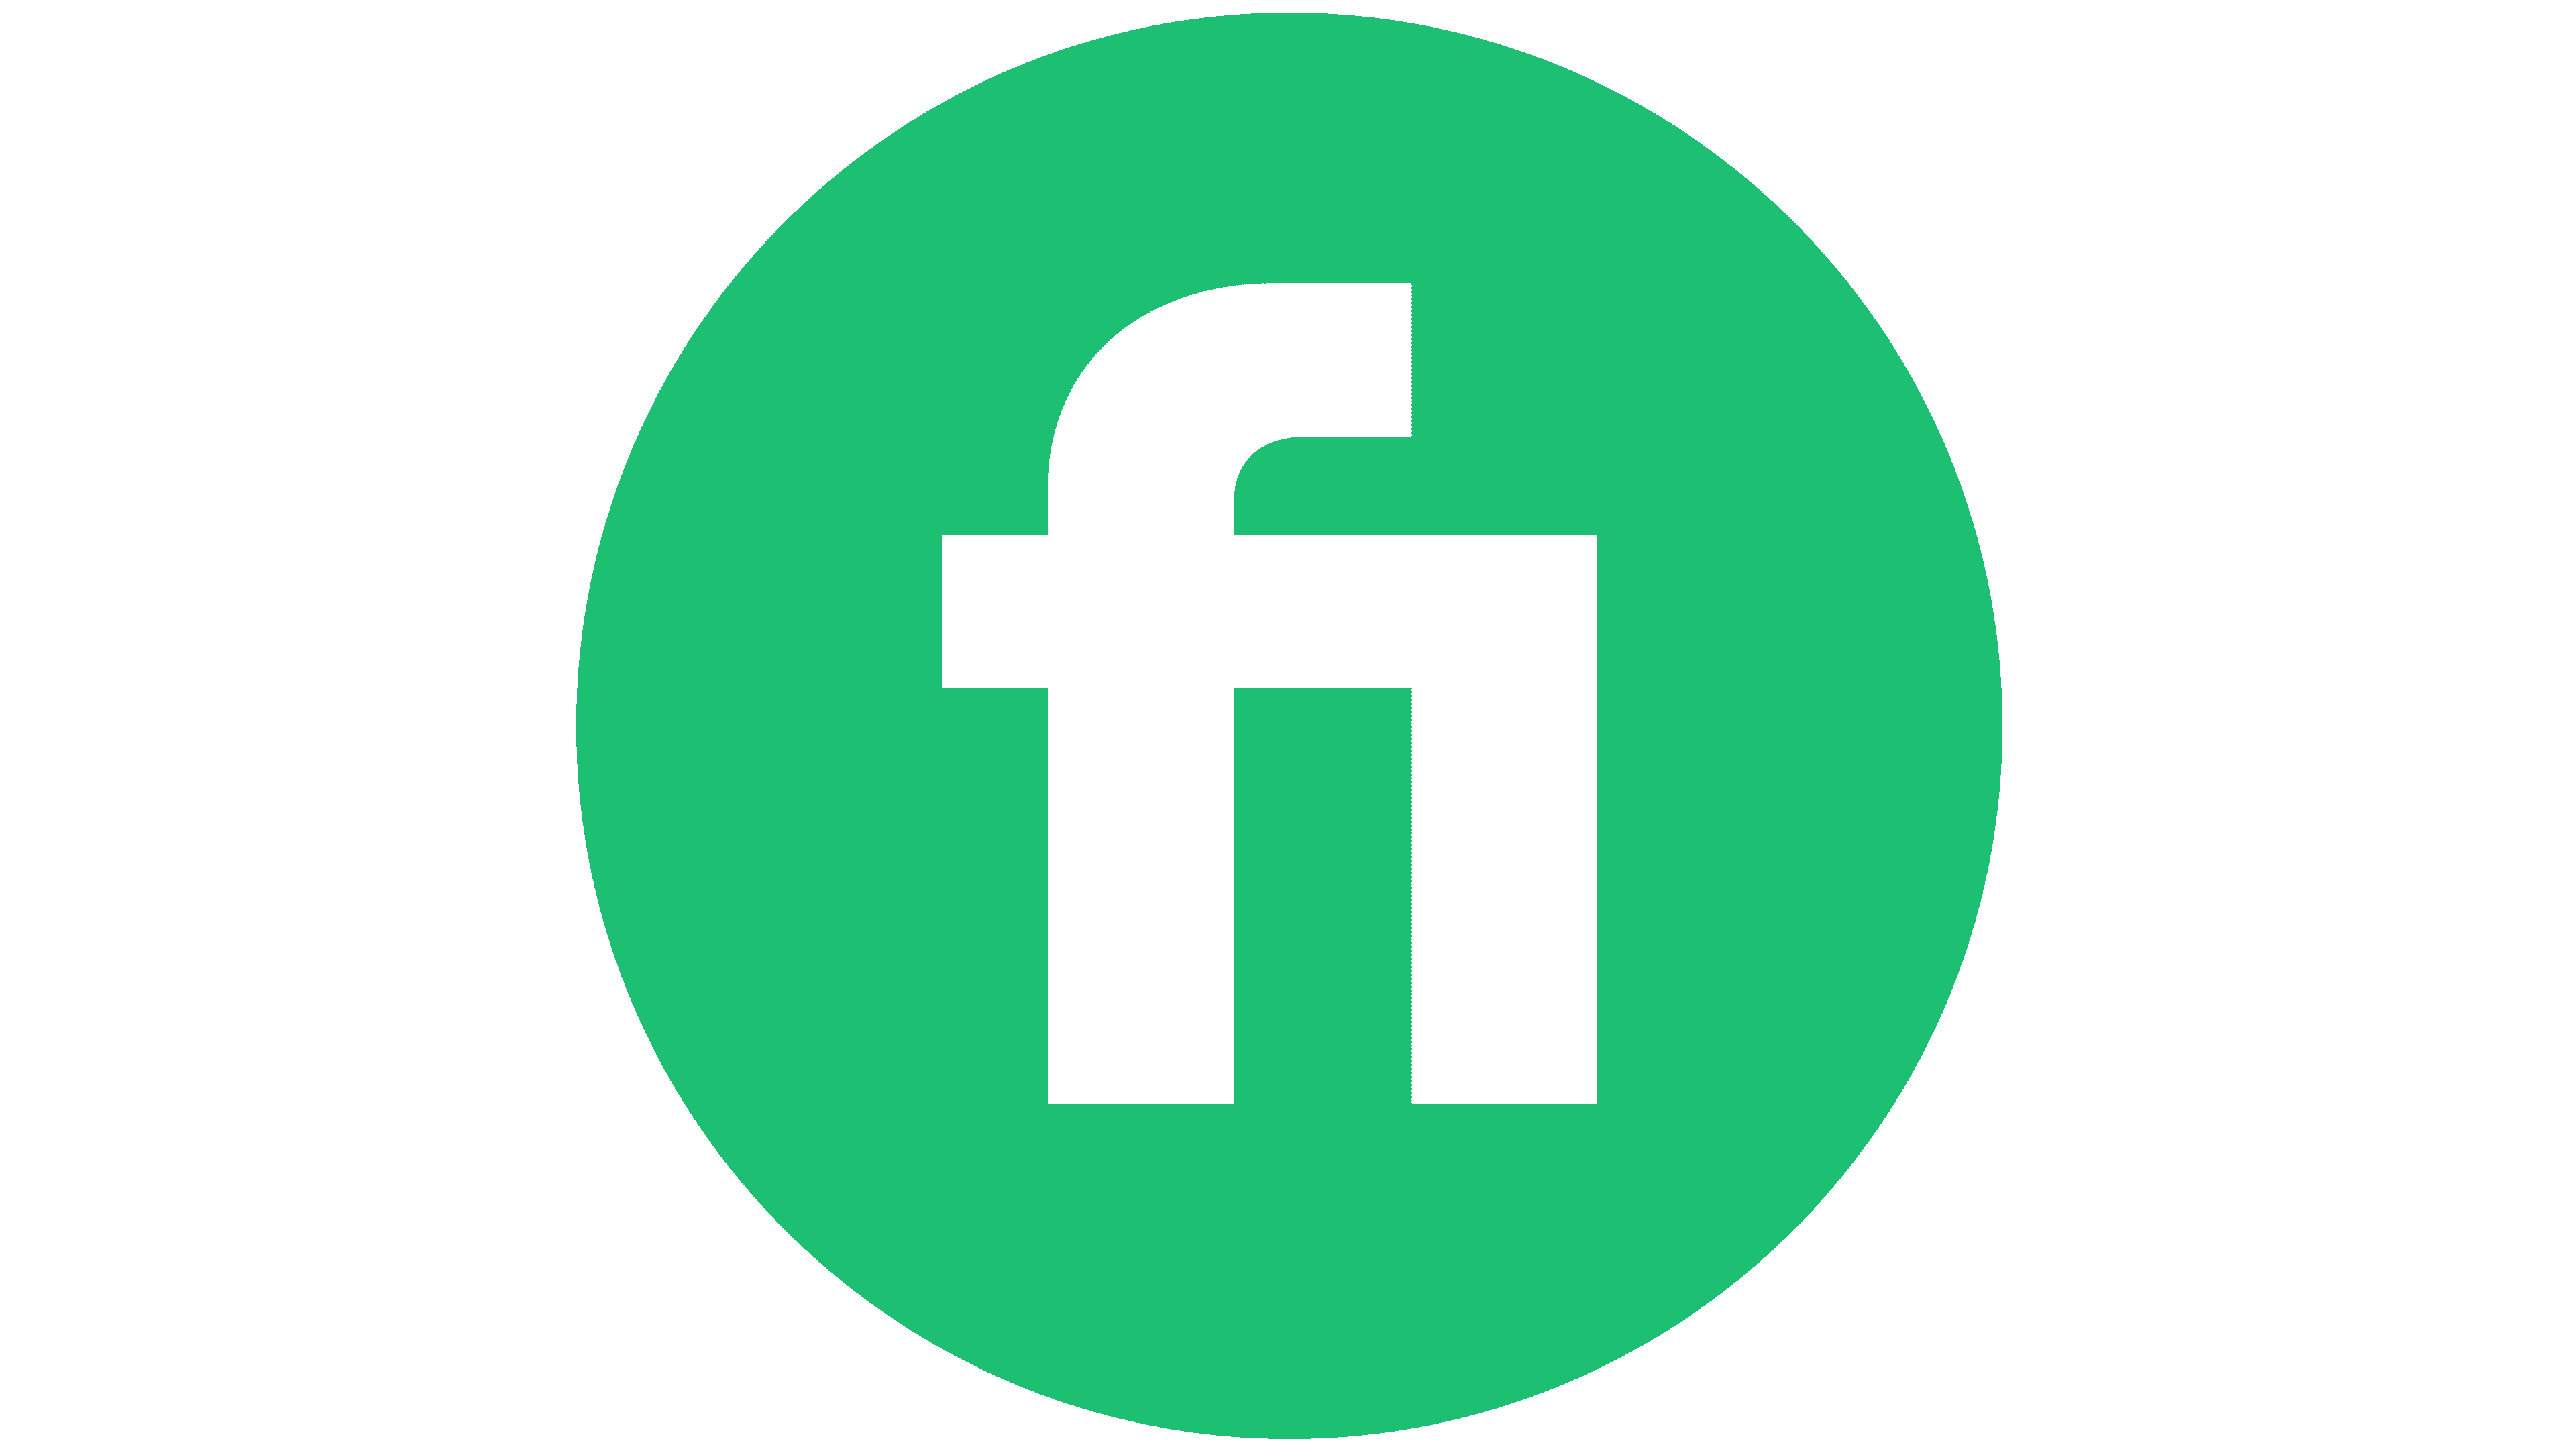 Fiverr Logo, symbol, meaning, history, PNG